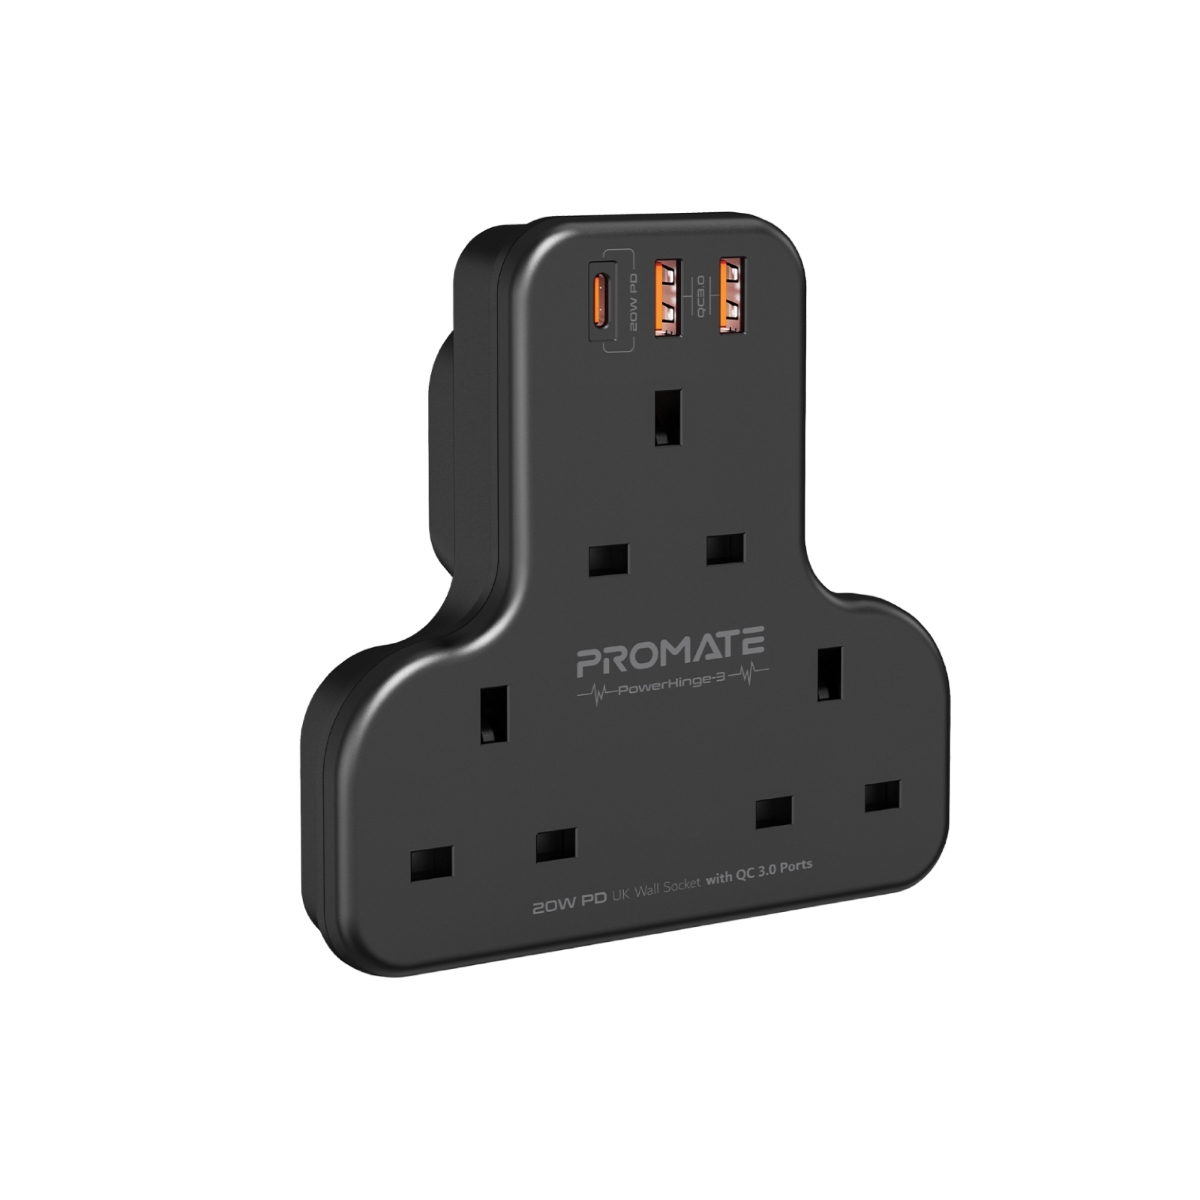 Promate Power Strip with 3250W 3 AC Outlets, 20W USB-C PD Port and Dual 20W QC 3.0 Ports, PowerHinge-3 Black